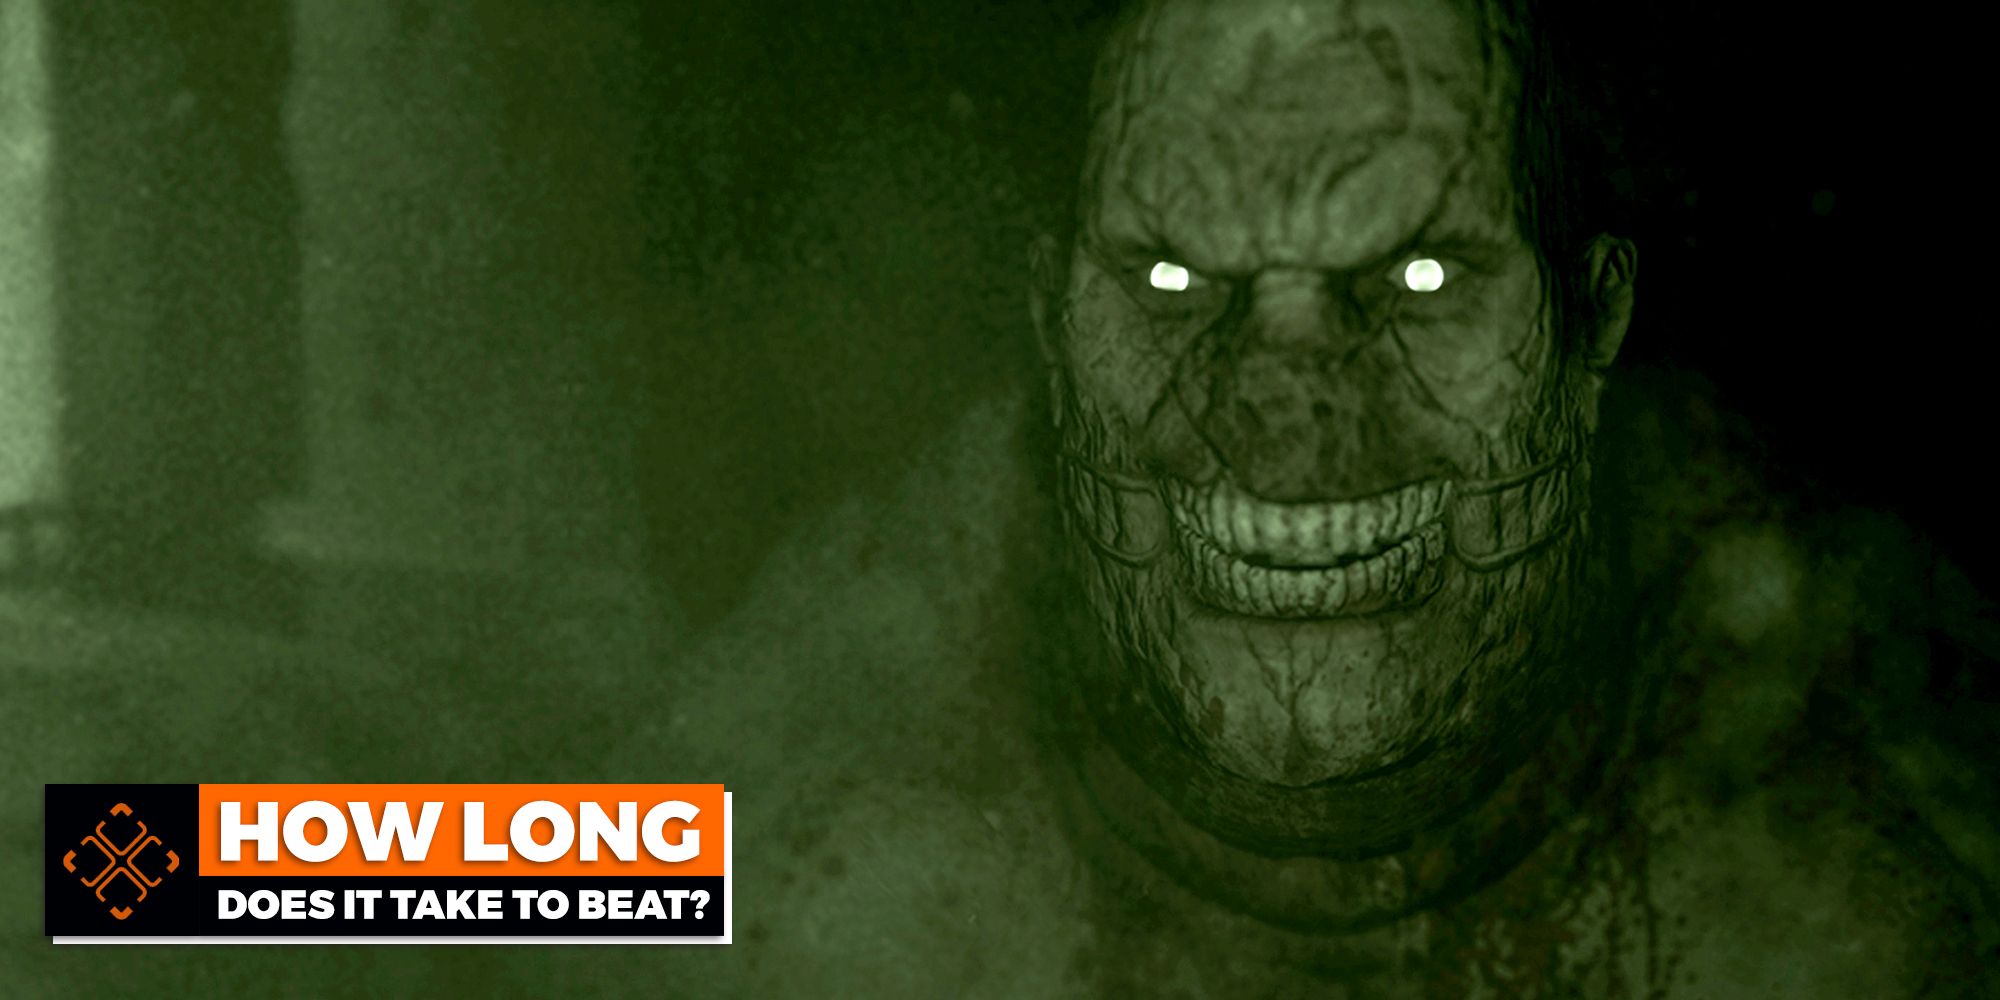 Game art from Outlast.